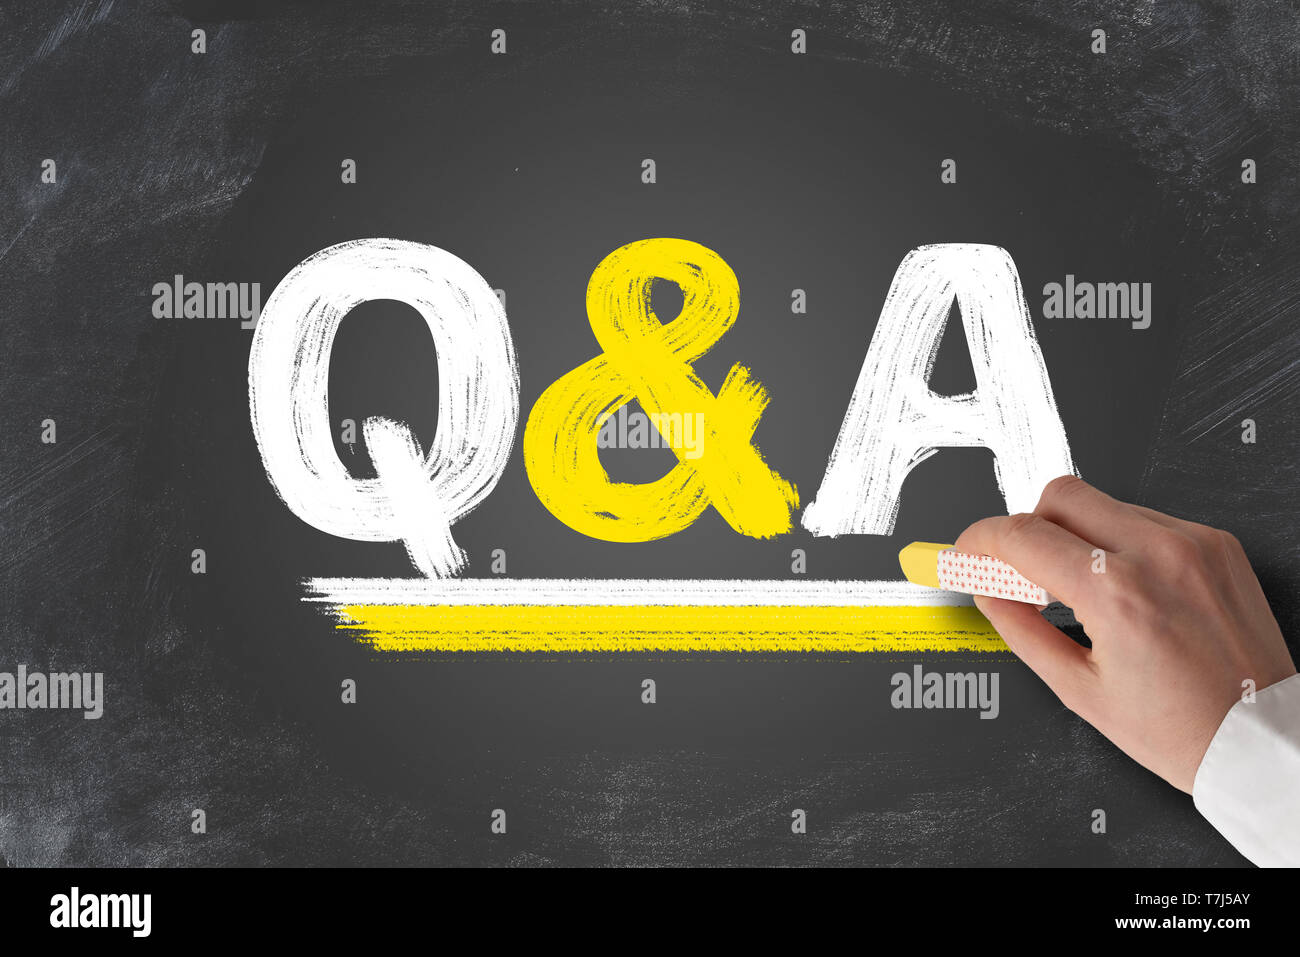 term Q and A, questions and answers, written on blackboard Stock Photo